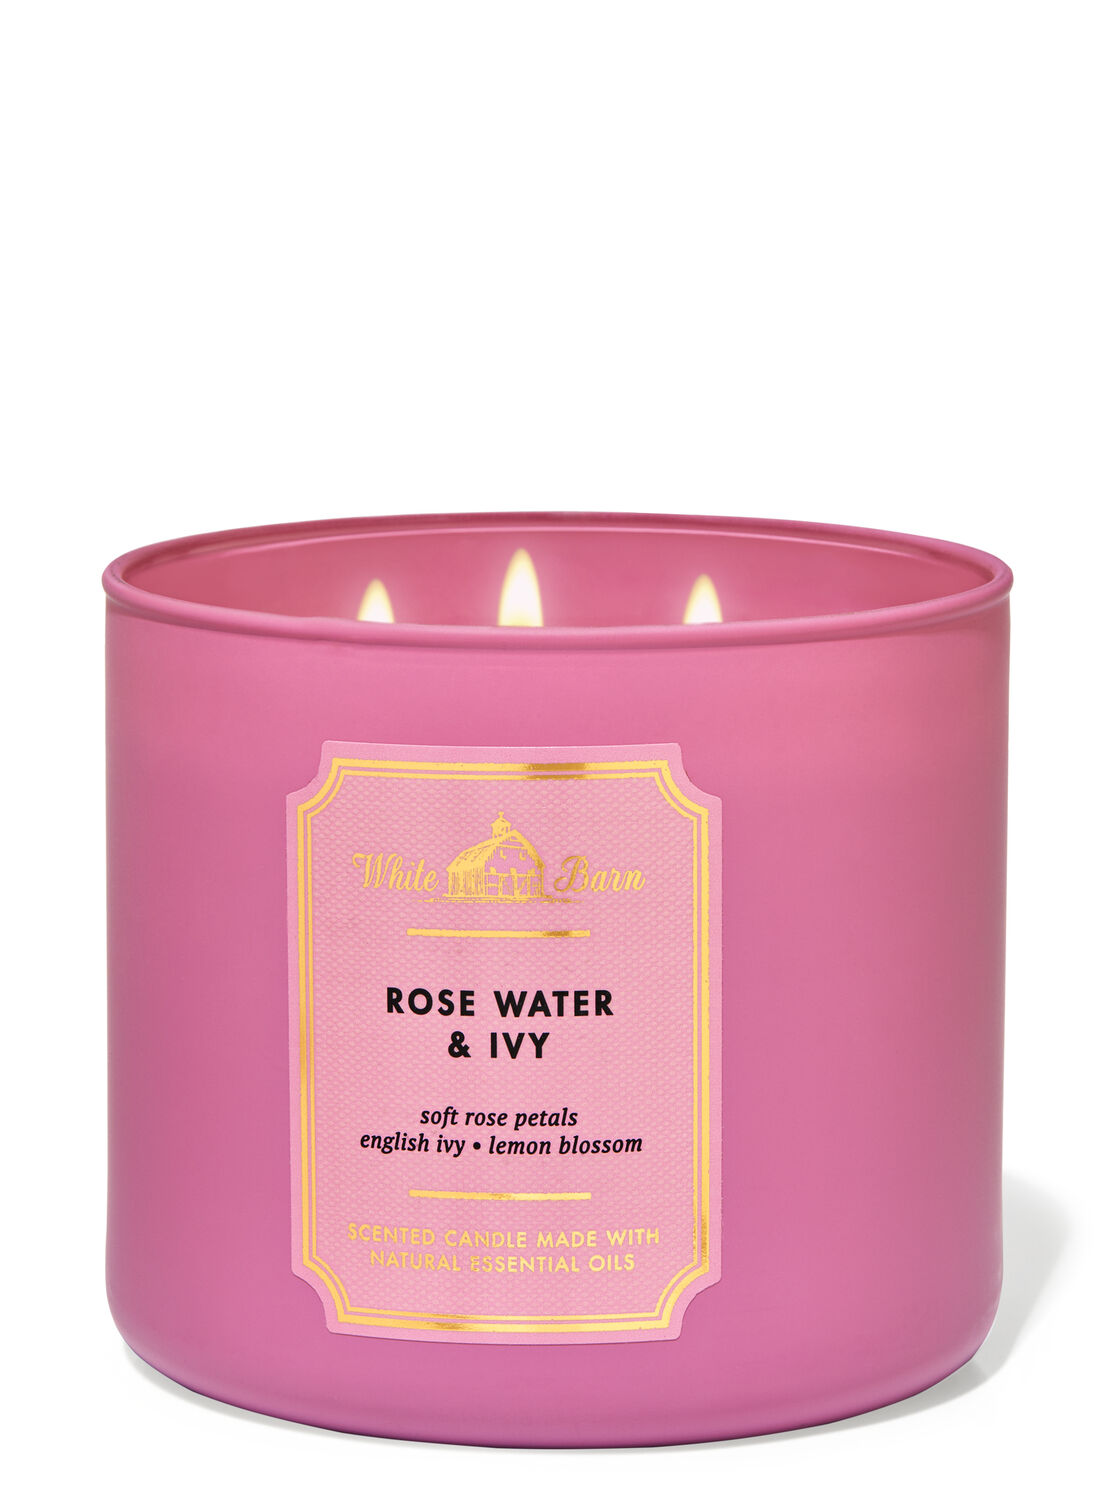 1 BATH & BODY WORKS ROSE WATER & IVY SCENTED 3-WICK LARGE 14.5 FILLED CANDLE NEW 